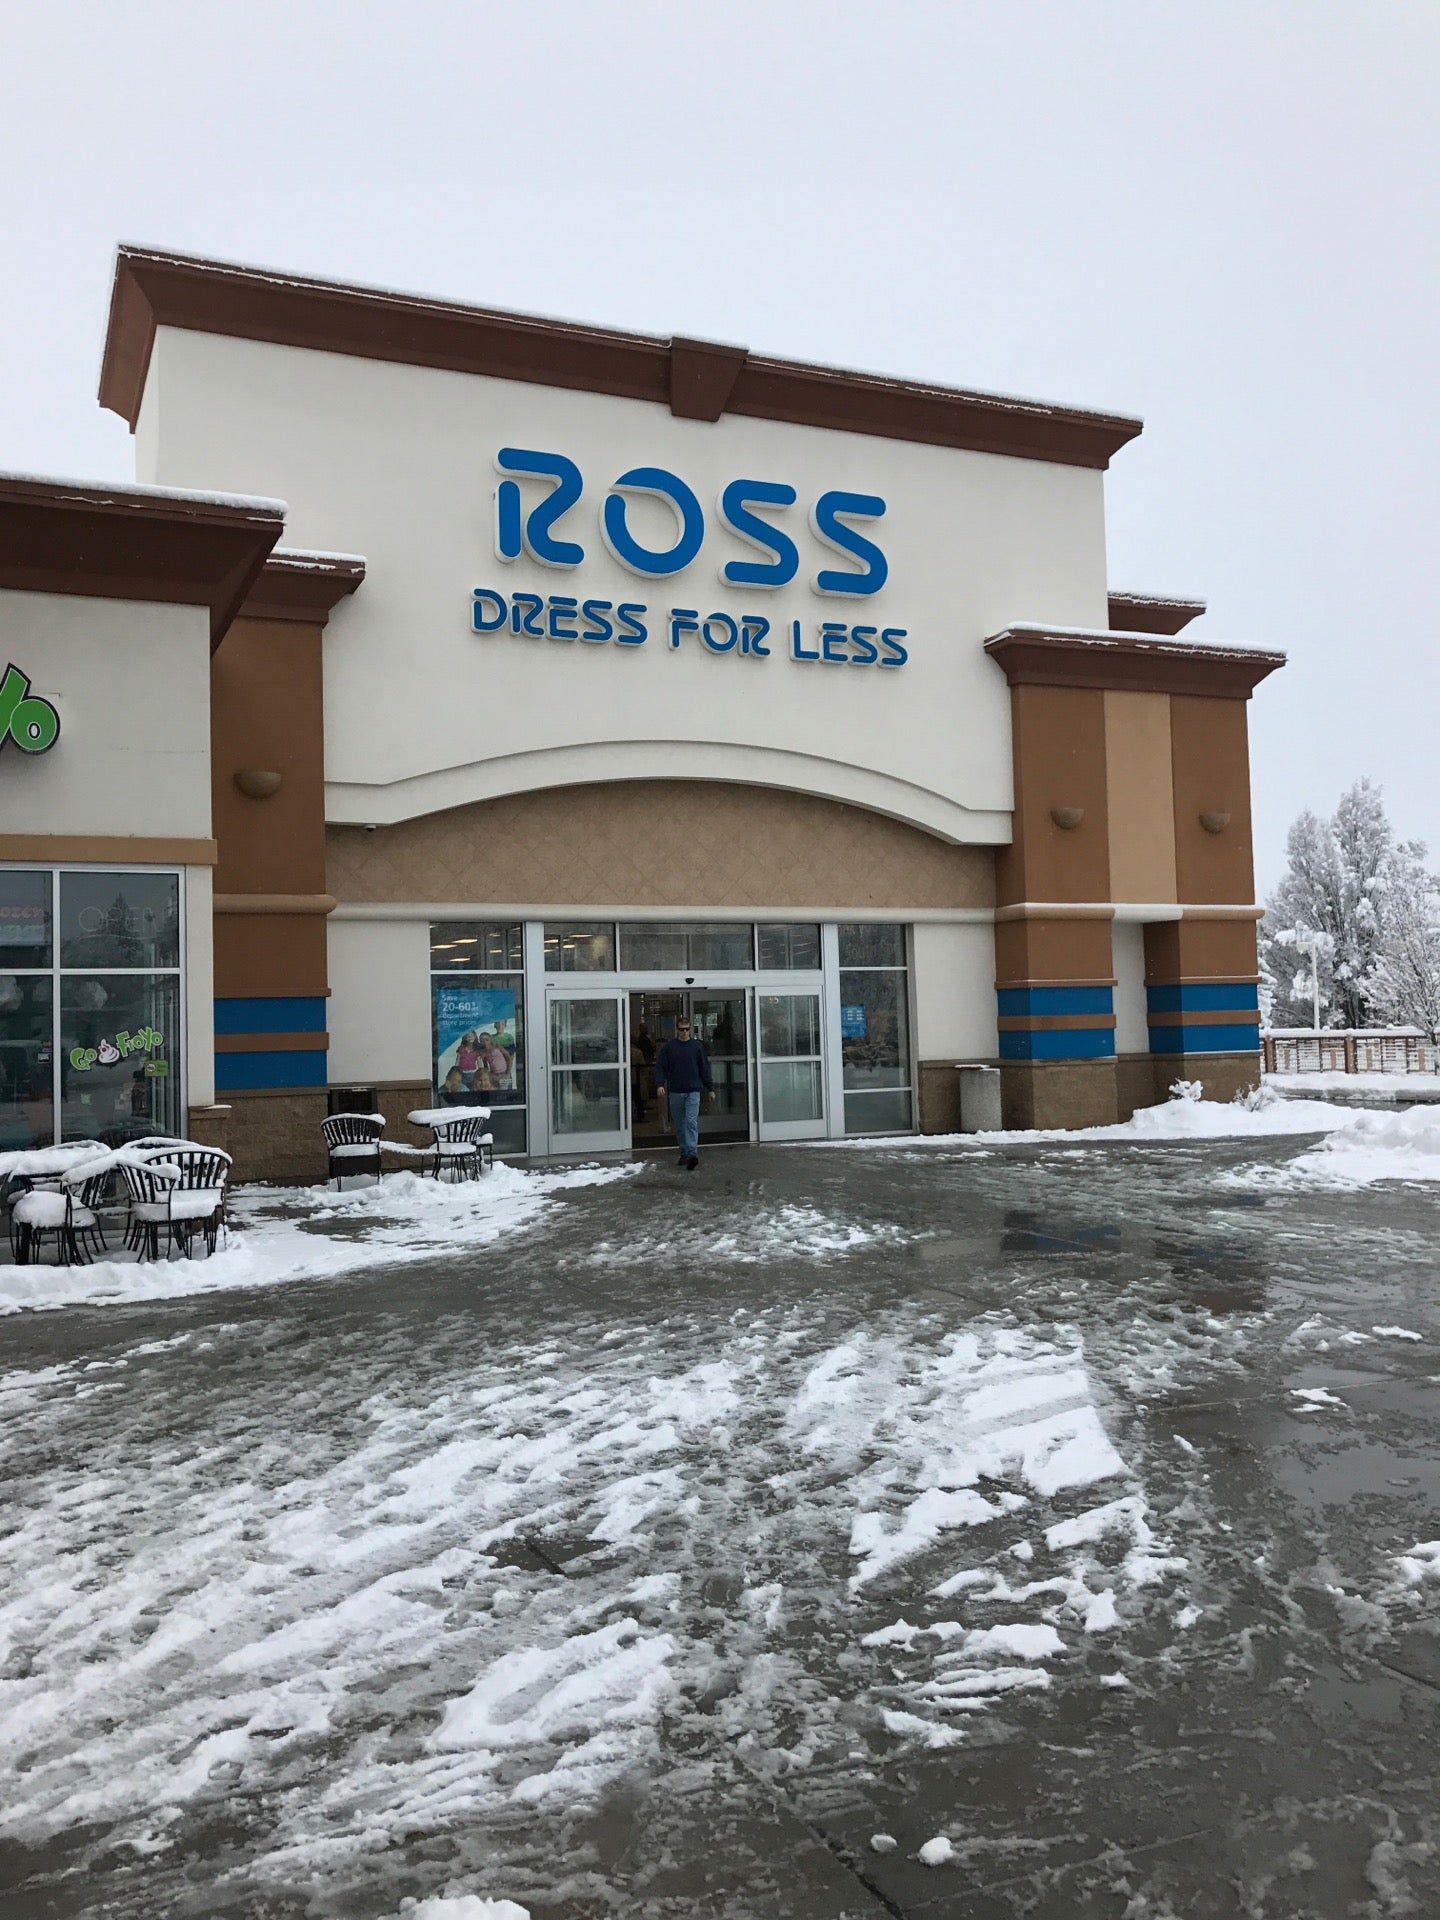 ROSS DRESS FOR LESS - 29 Photos & 10 Reviews - 4441 S White